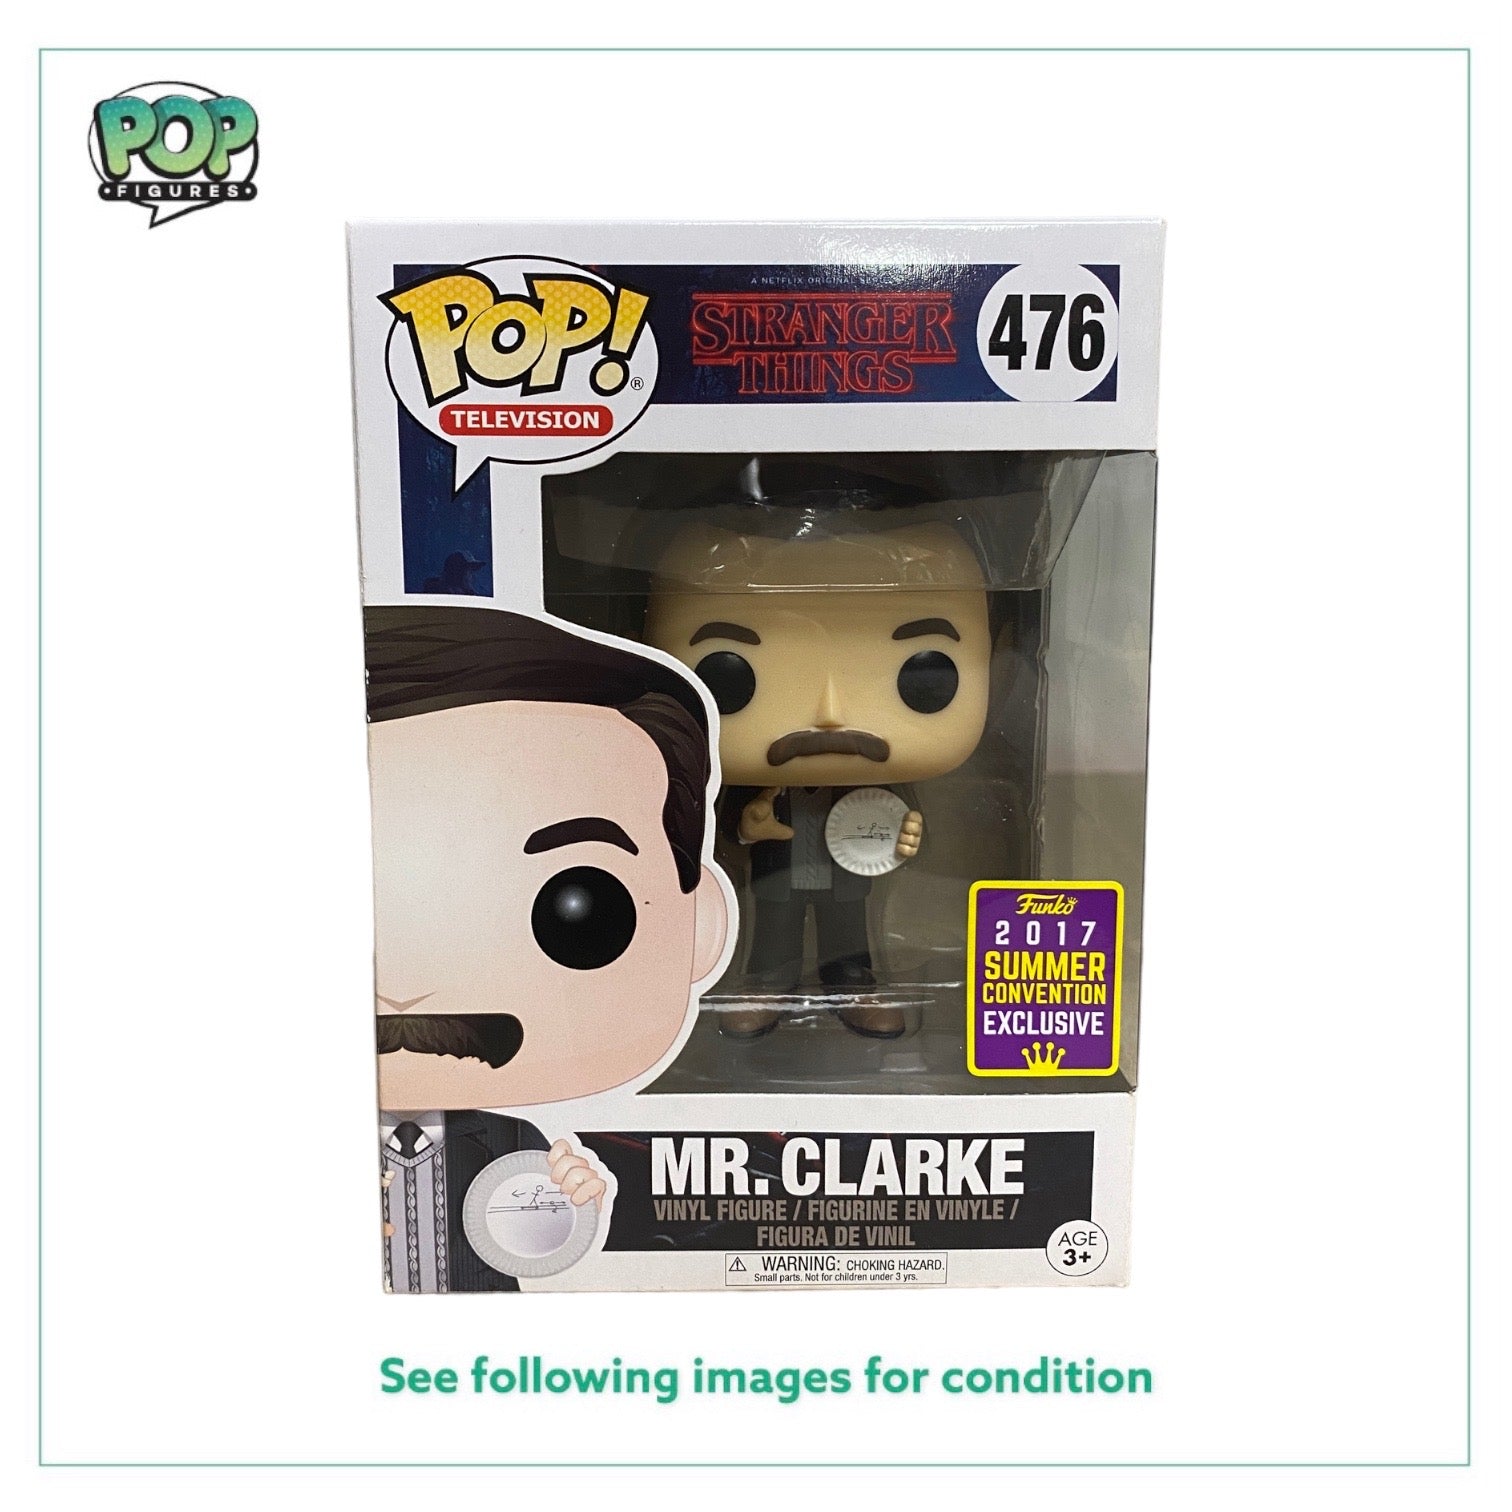 Mr. Clarke #476 Funko Pop! - Stranger Things - SDCC 2017 Shared Exclusive - Condition 8/10